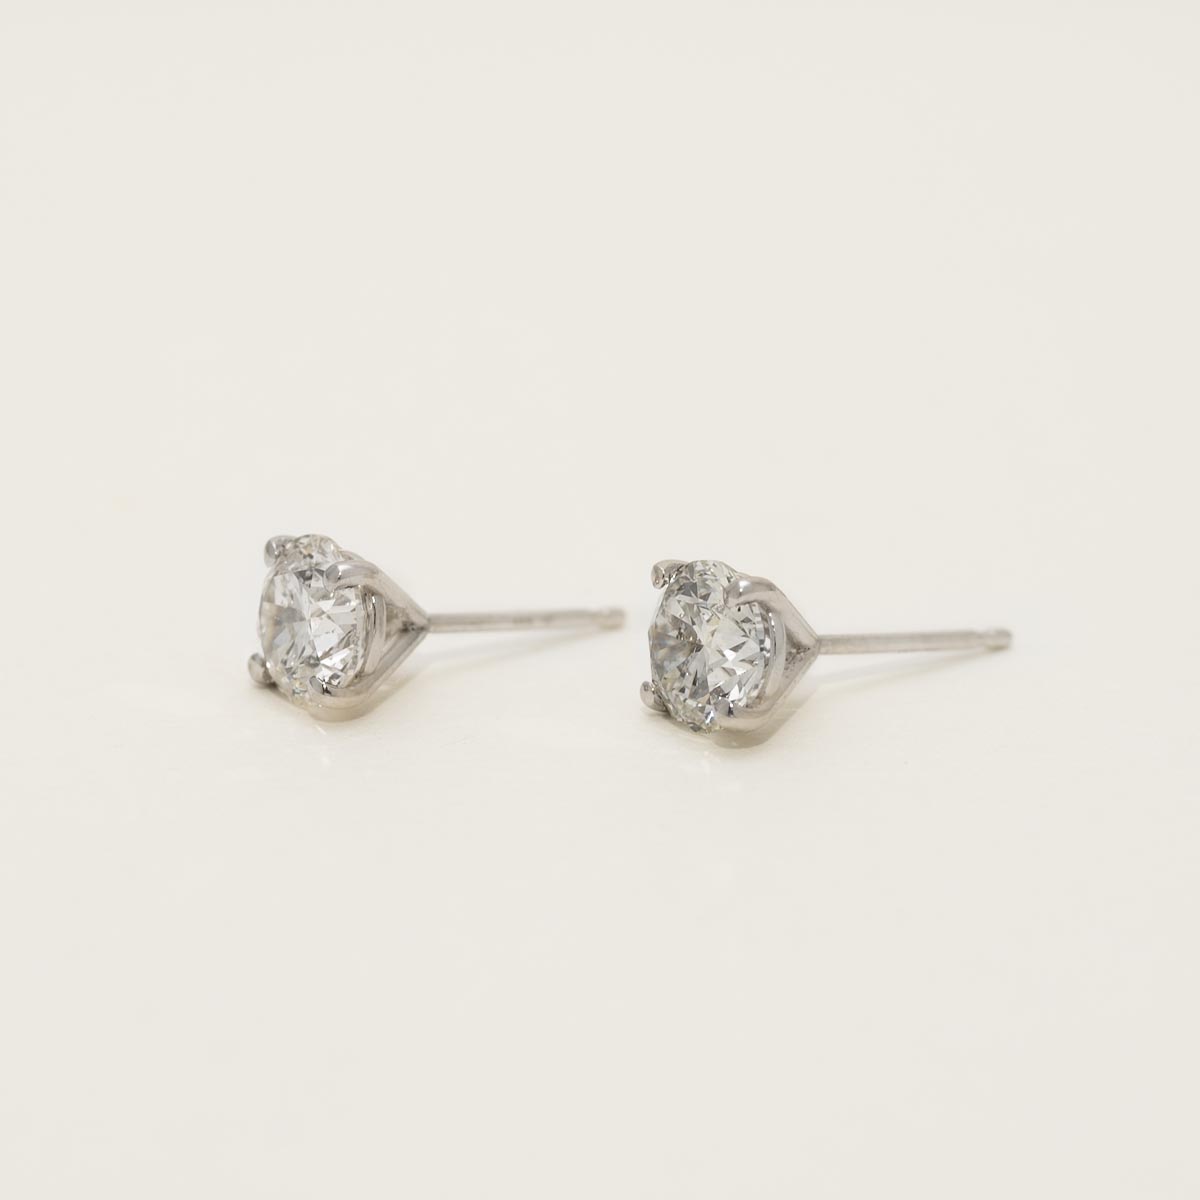 Diamond Martini Style Stud Earrings in 14kt White Gold (2 5/8ct tw)